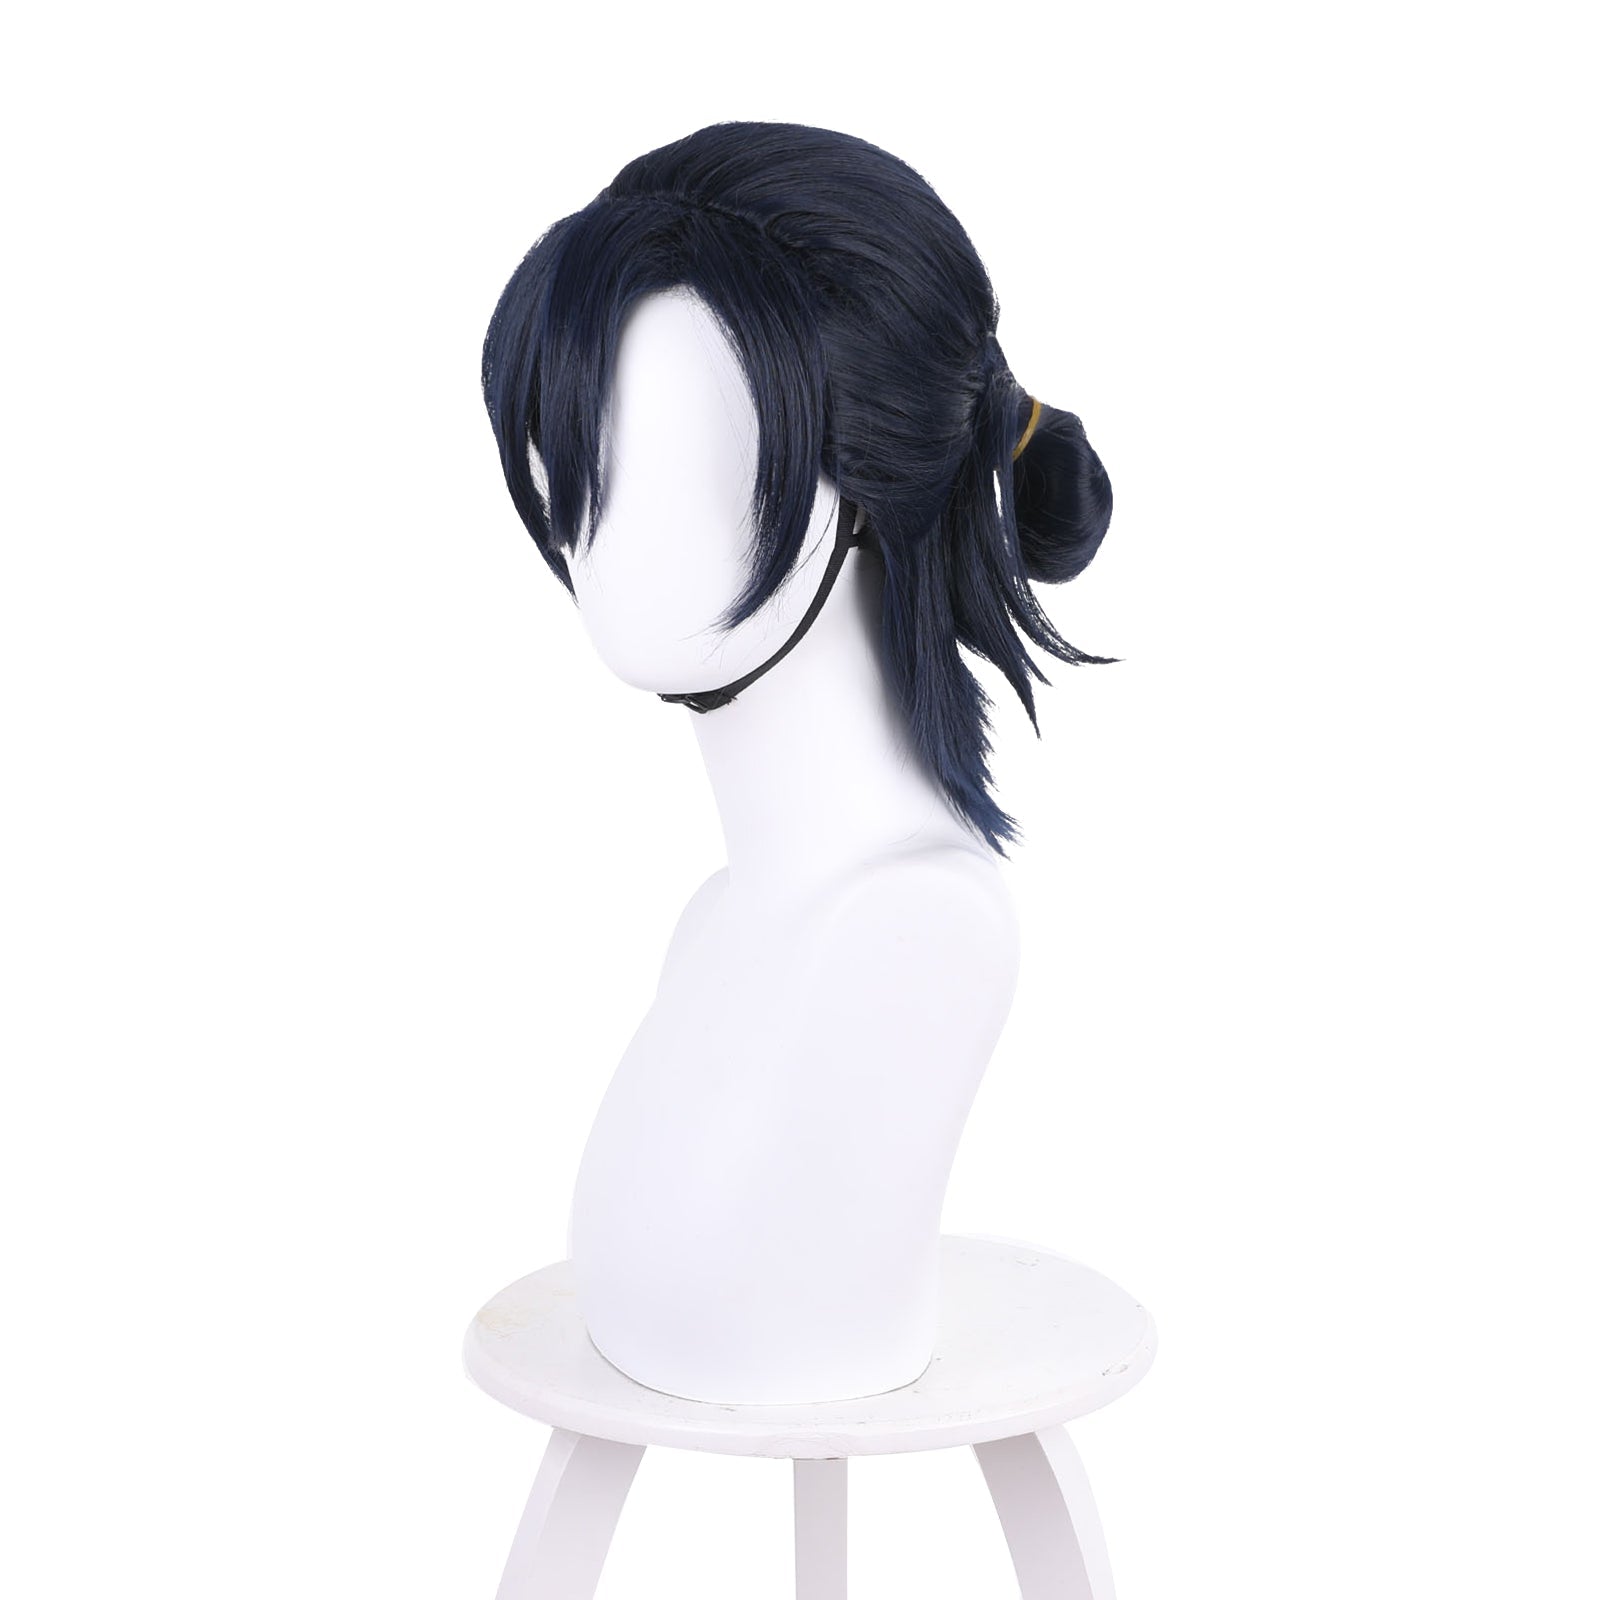 Rulercosplay Anime Cosplay Wigs for Ajiro Shinpei navy blue Cosplay Wig of Summer Time Rendering - Rulercosplay